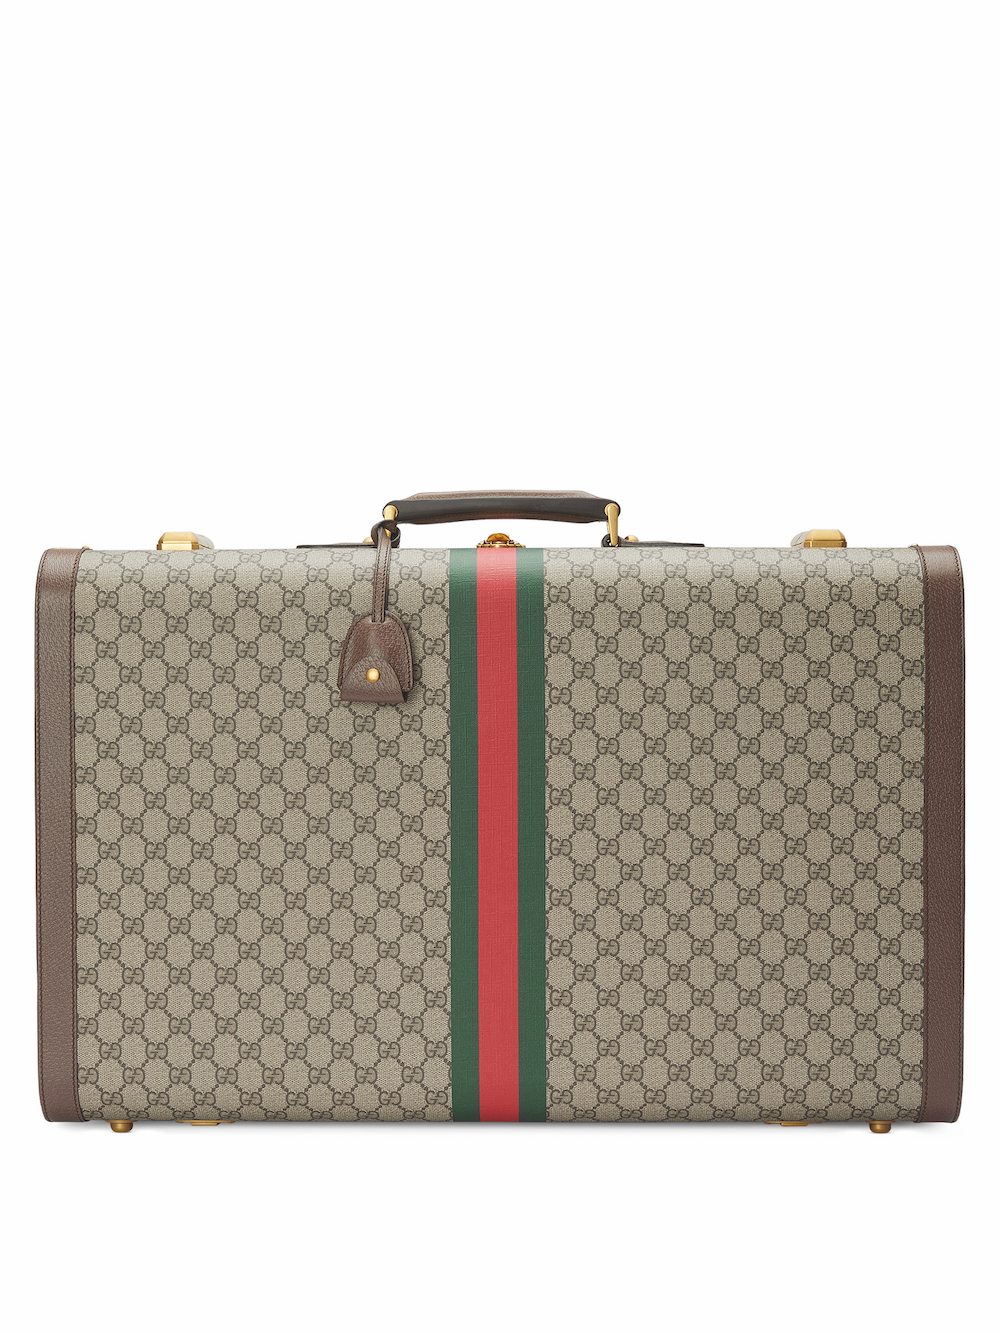 Luxulia - Stay classy with Louis Vuitton Mahjong 🎲!